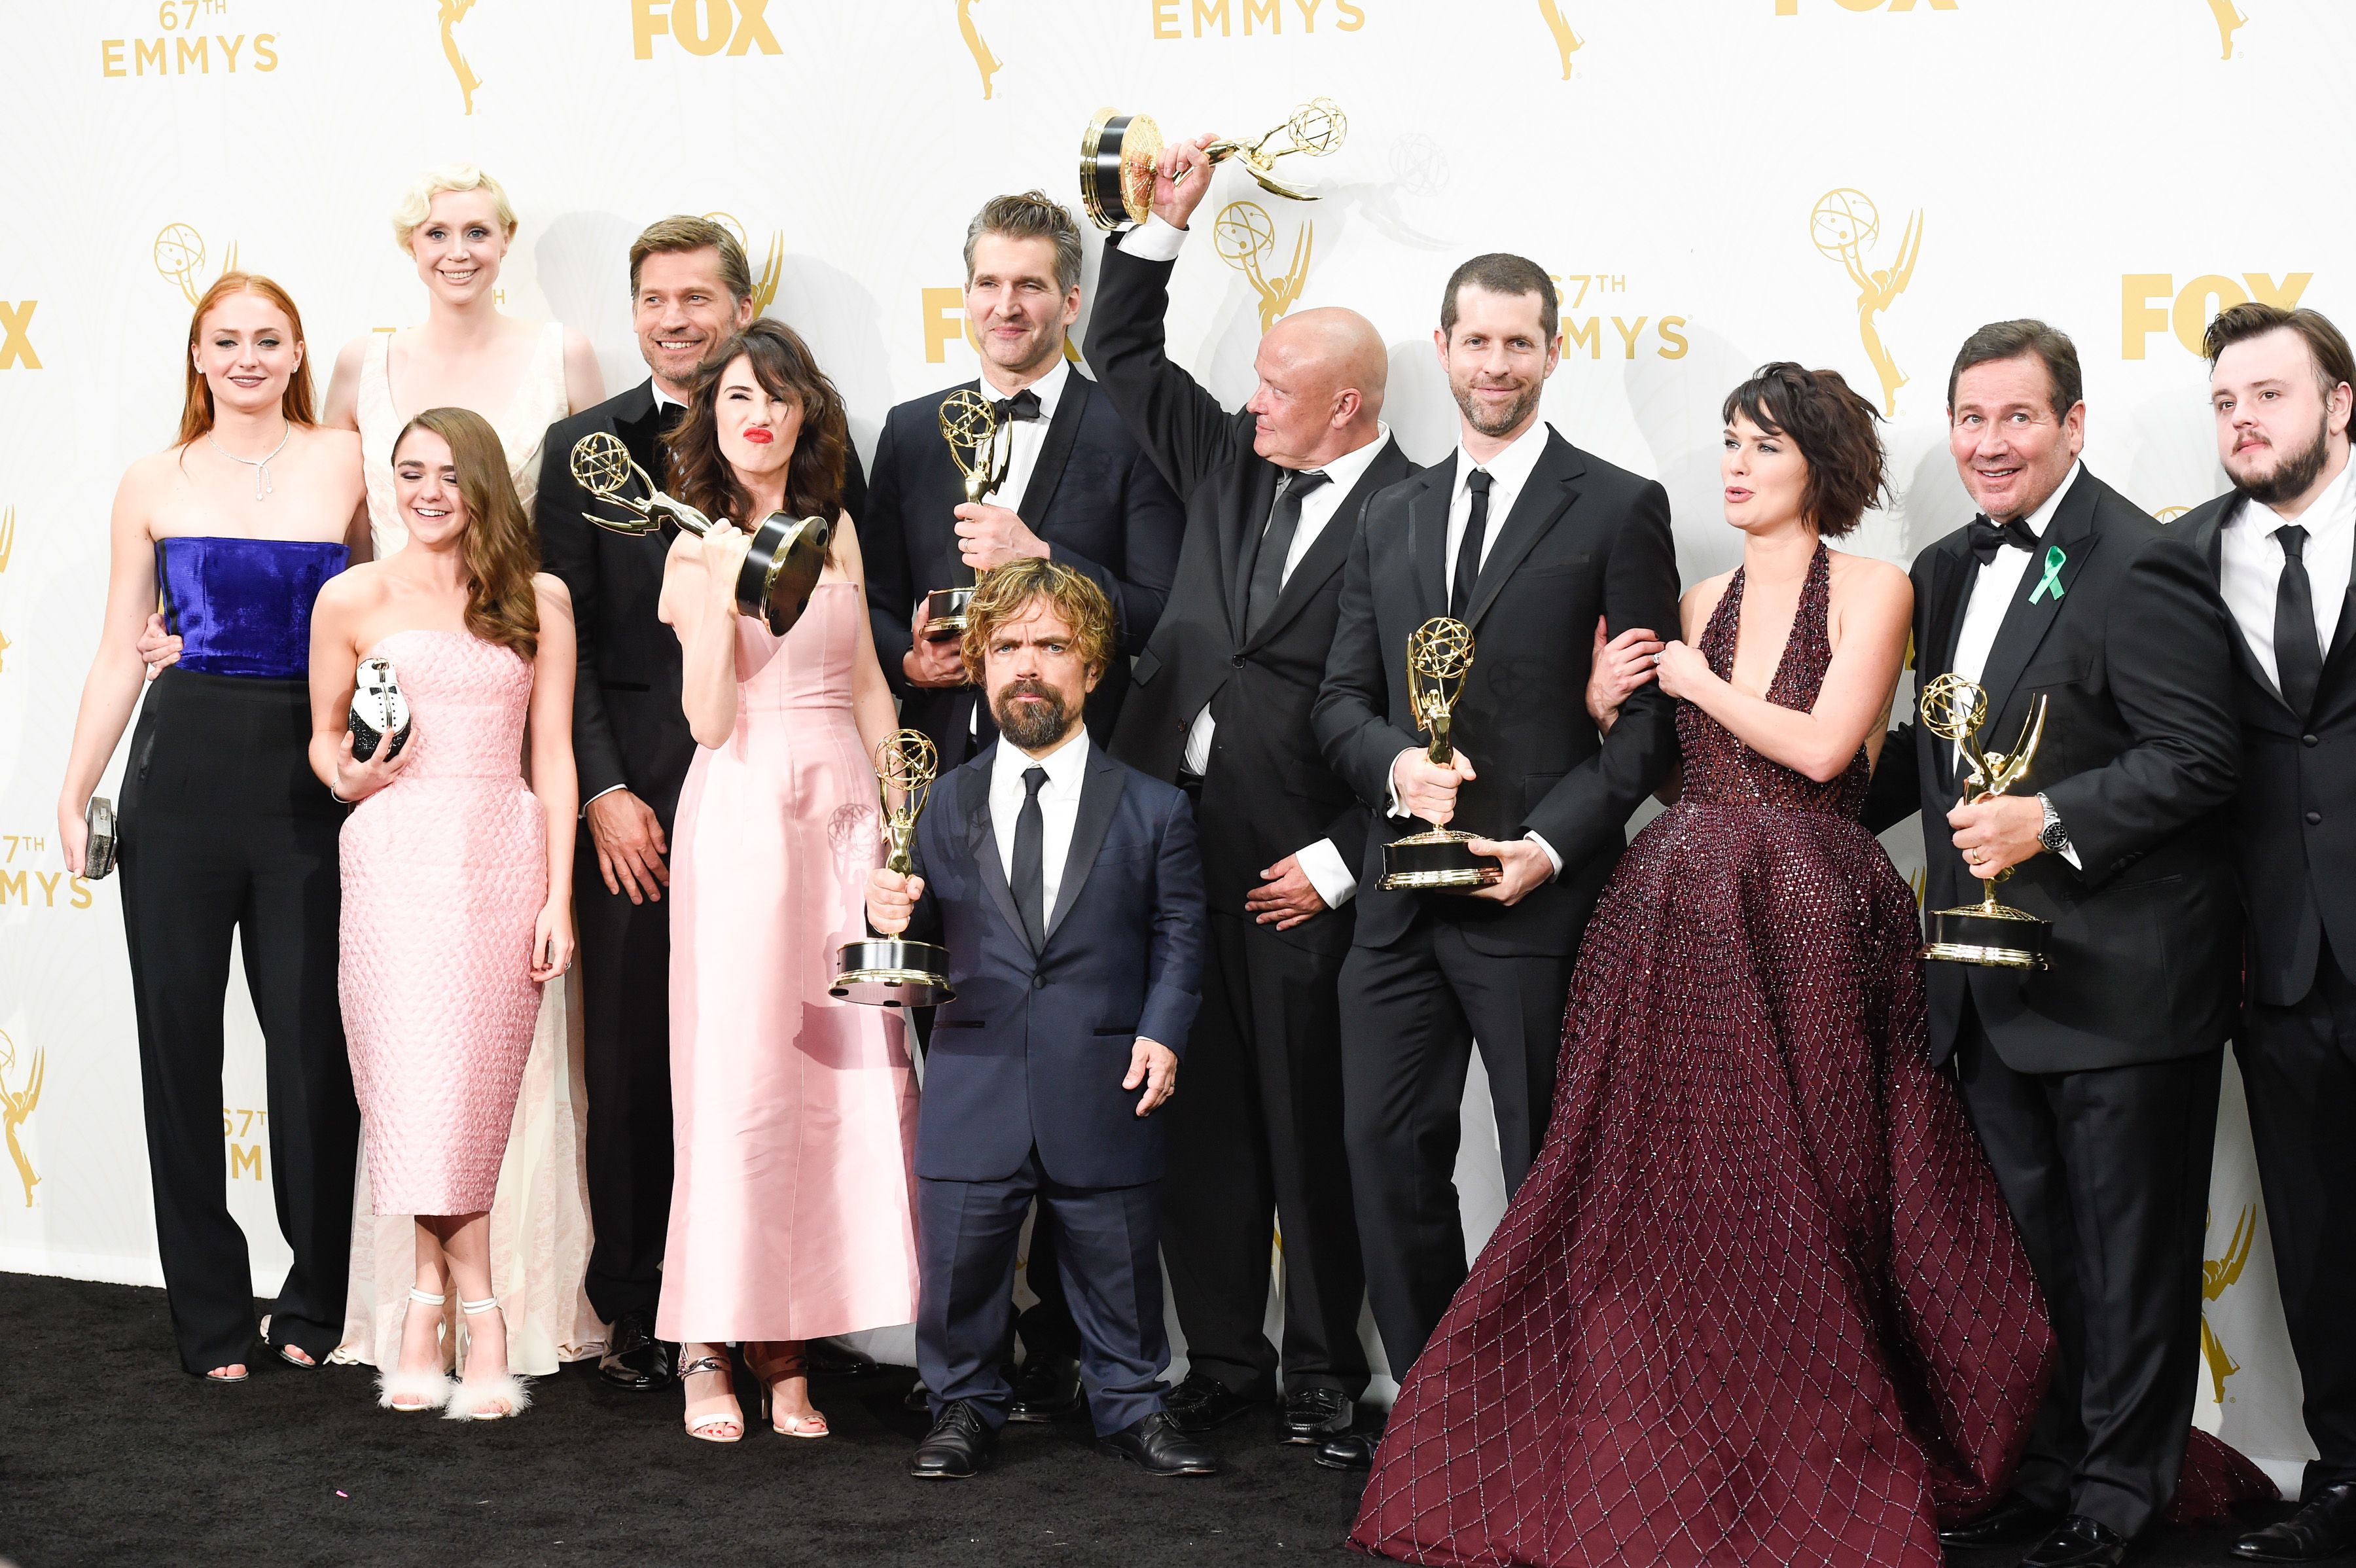 How Would You Die in “Game of Thrones”? 67th Emmy Awards : Press Room, Los Angeles   20 Sep 2015